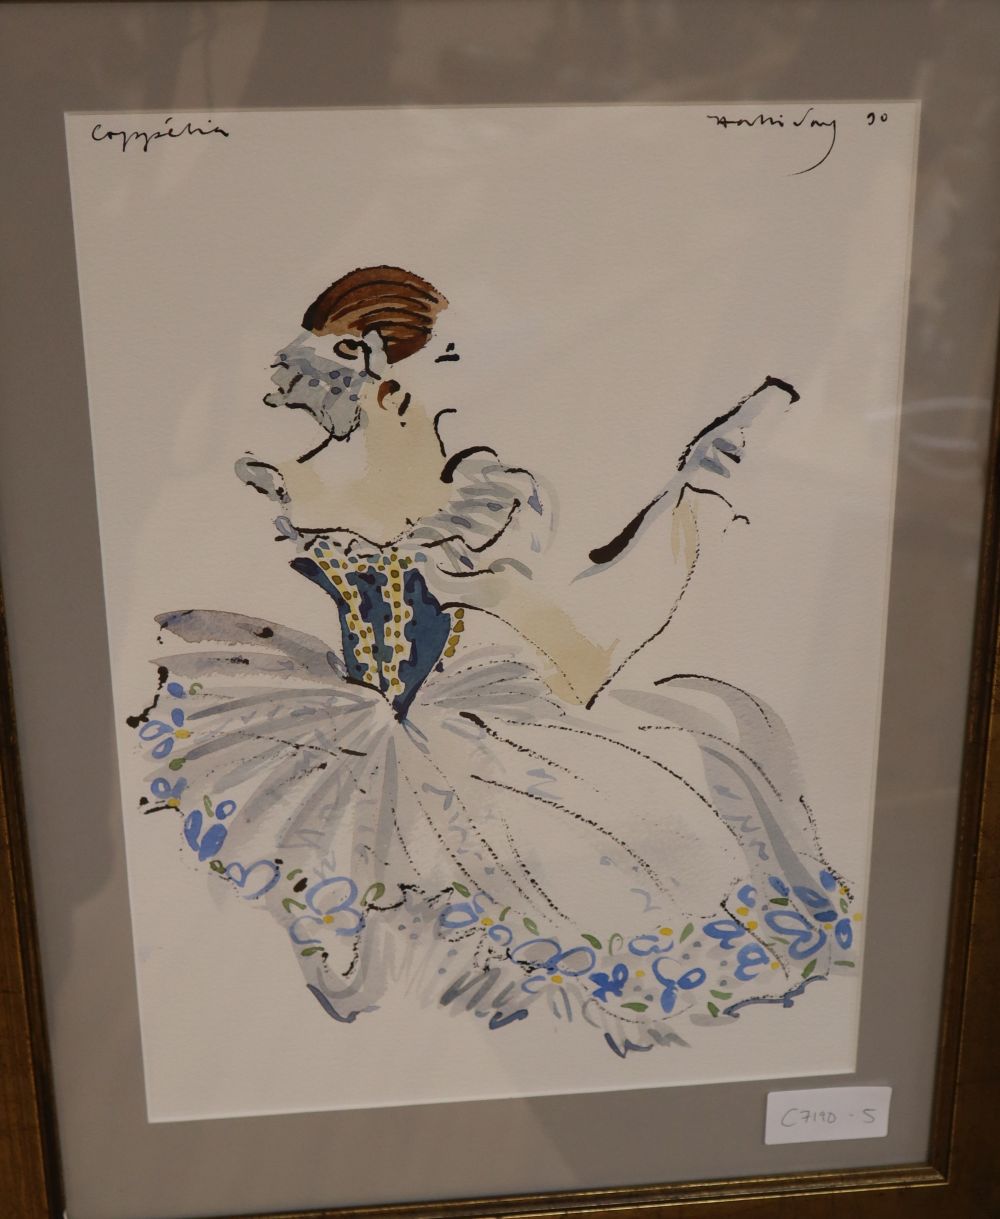 Alan Halliday (b.1952), watercolour and ink, Costume design for Coppelia, English National Ballet, signed and dated 90, 38 x 28cm